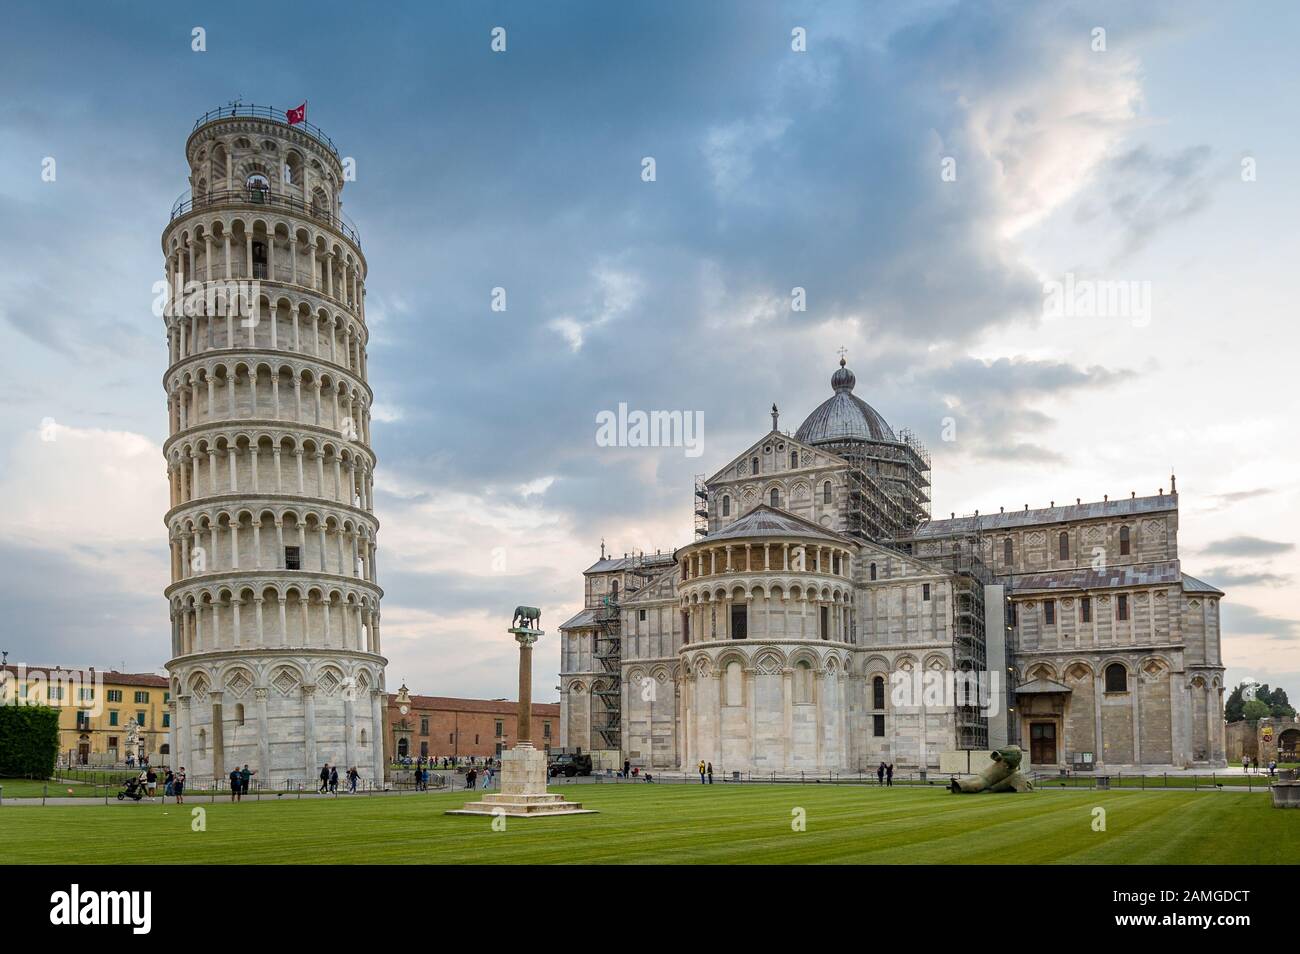 Piazza del Duomo and Pisa tower at susnet. Toscano, Italy. Stock Photo